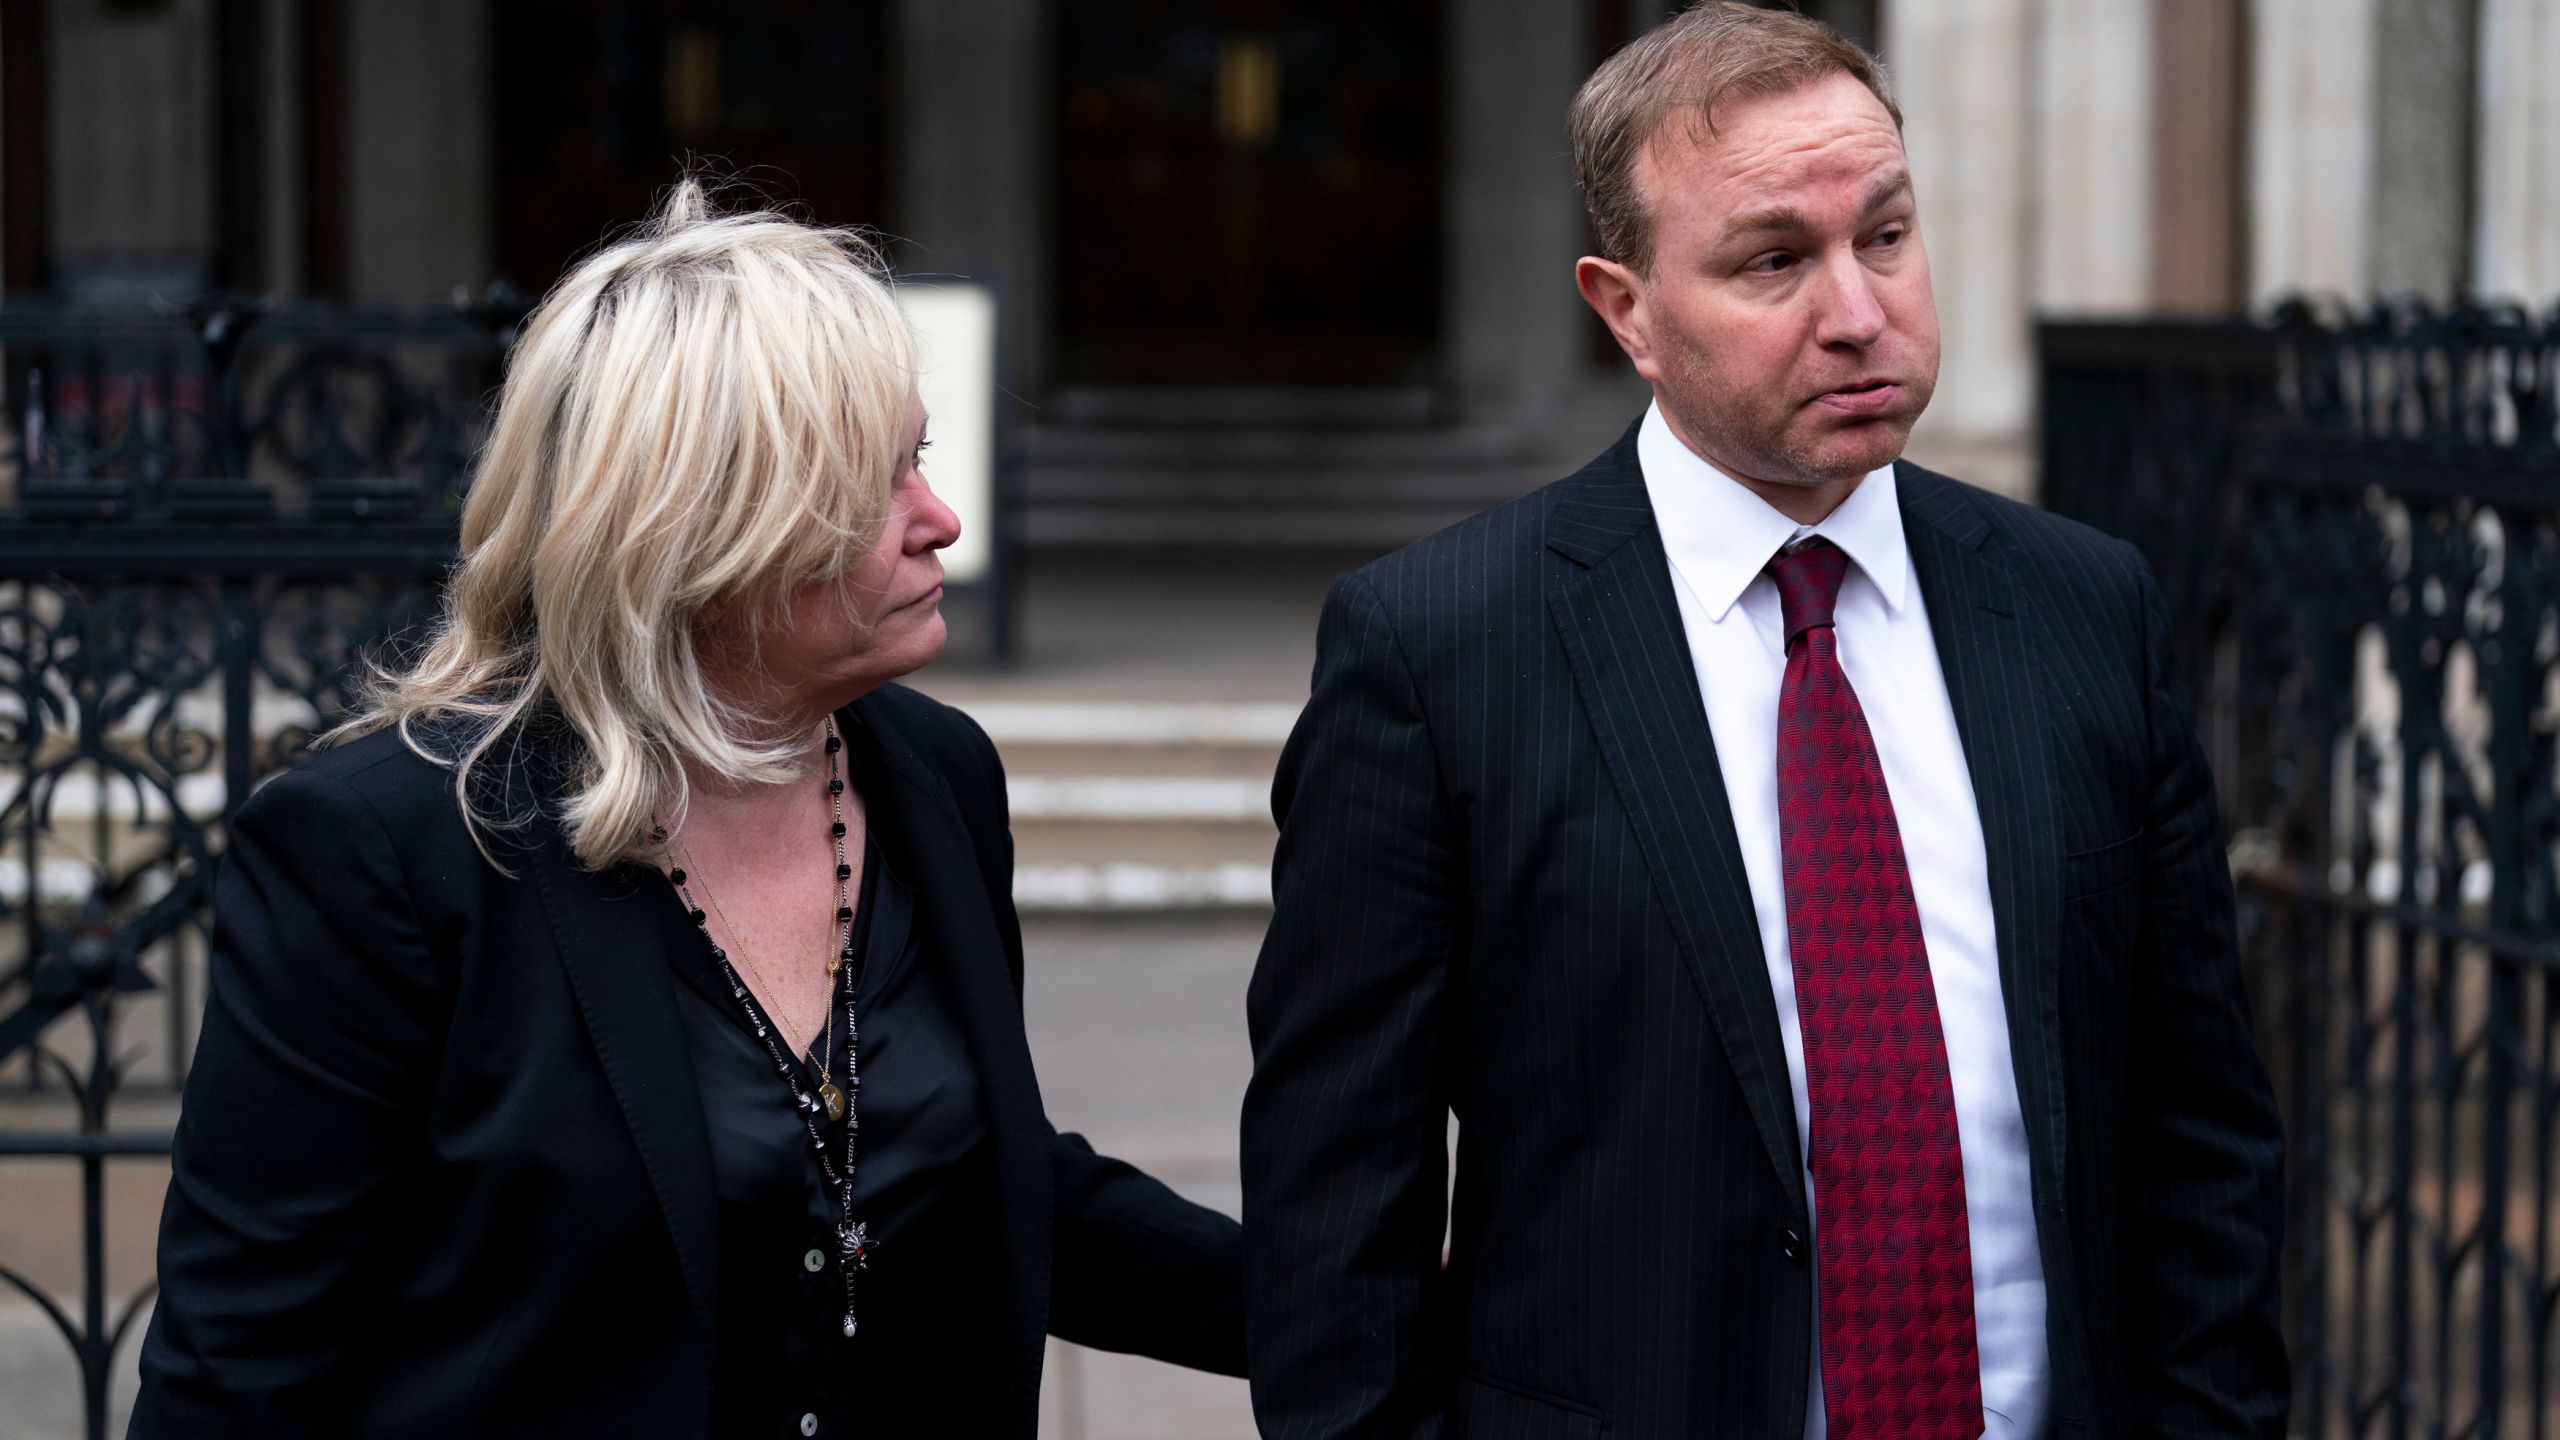 Financial market trader Tom Hayes walks with his lawyer Karen Todner, left, outside the Royal Courts Of Justice in London after two former financial market traders convicted of interest rate benchmark manipulation have had bids to clear their names rejected by the Court of Appeal, on Wednesday March 27, 2024. Tom Hayes, 44, a former Citigroup and UBS trader, was found guilty of multiple counts of conspiracy to defraud over manipulating the London Inter-Bank Offered Rate (Libor) between 2006 and 2010. His case, alongside that of another similarly jailed trader Carlo Palombo, 45, were referred to the court by the Criminal Cases Review Commission (CCRC), which investigates potential miscarriages of justice. (Jordan Pettitt/PA via AP)